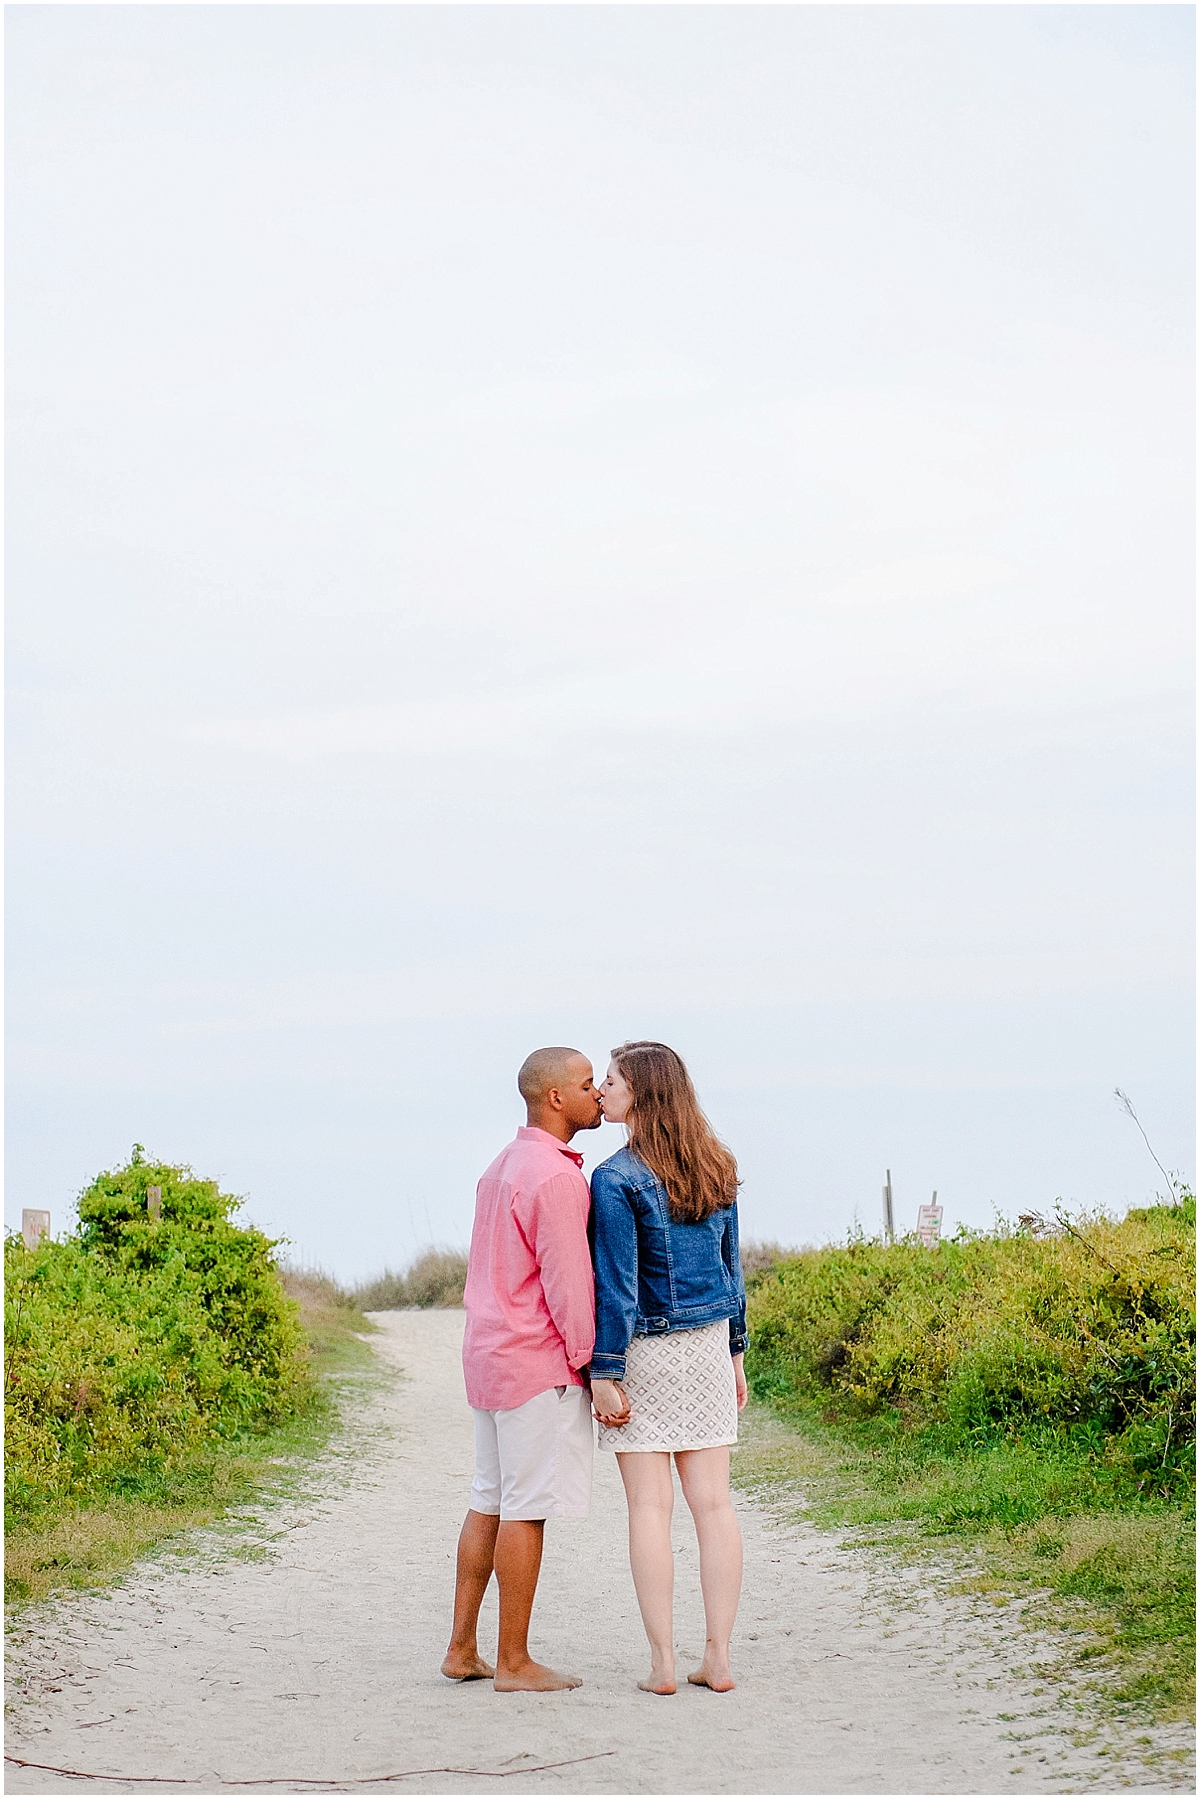 Finding The Perfect Location For Your Engagement Photography Session Hatteras Island wedding photographer, destination wedding photographer, outer banks